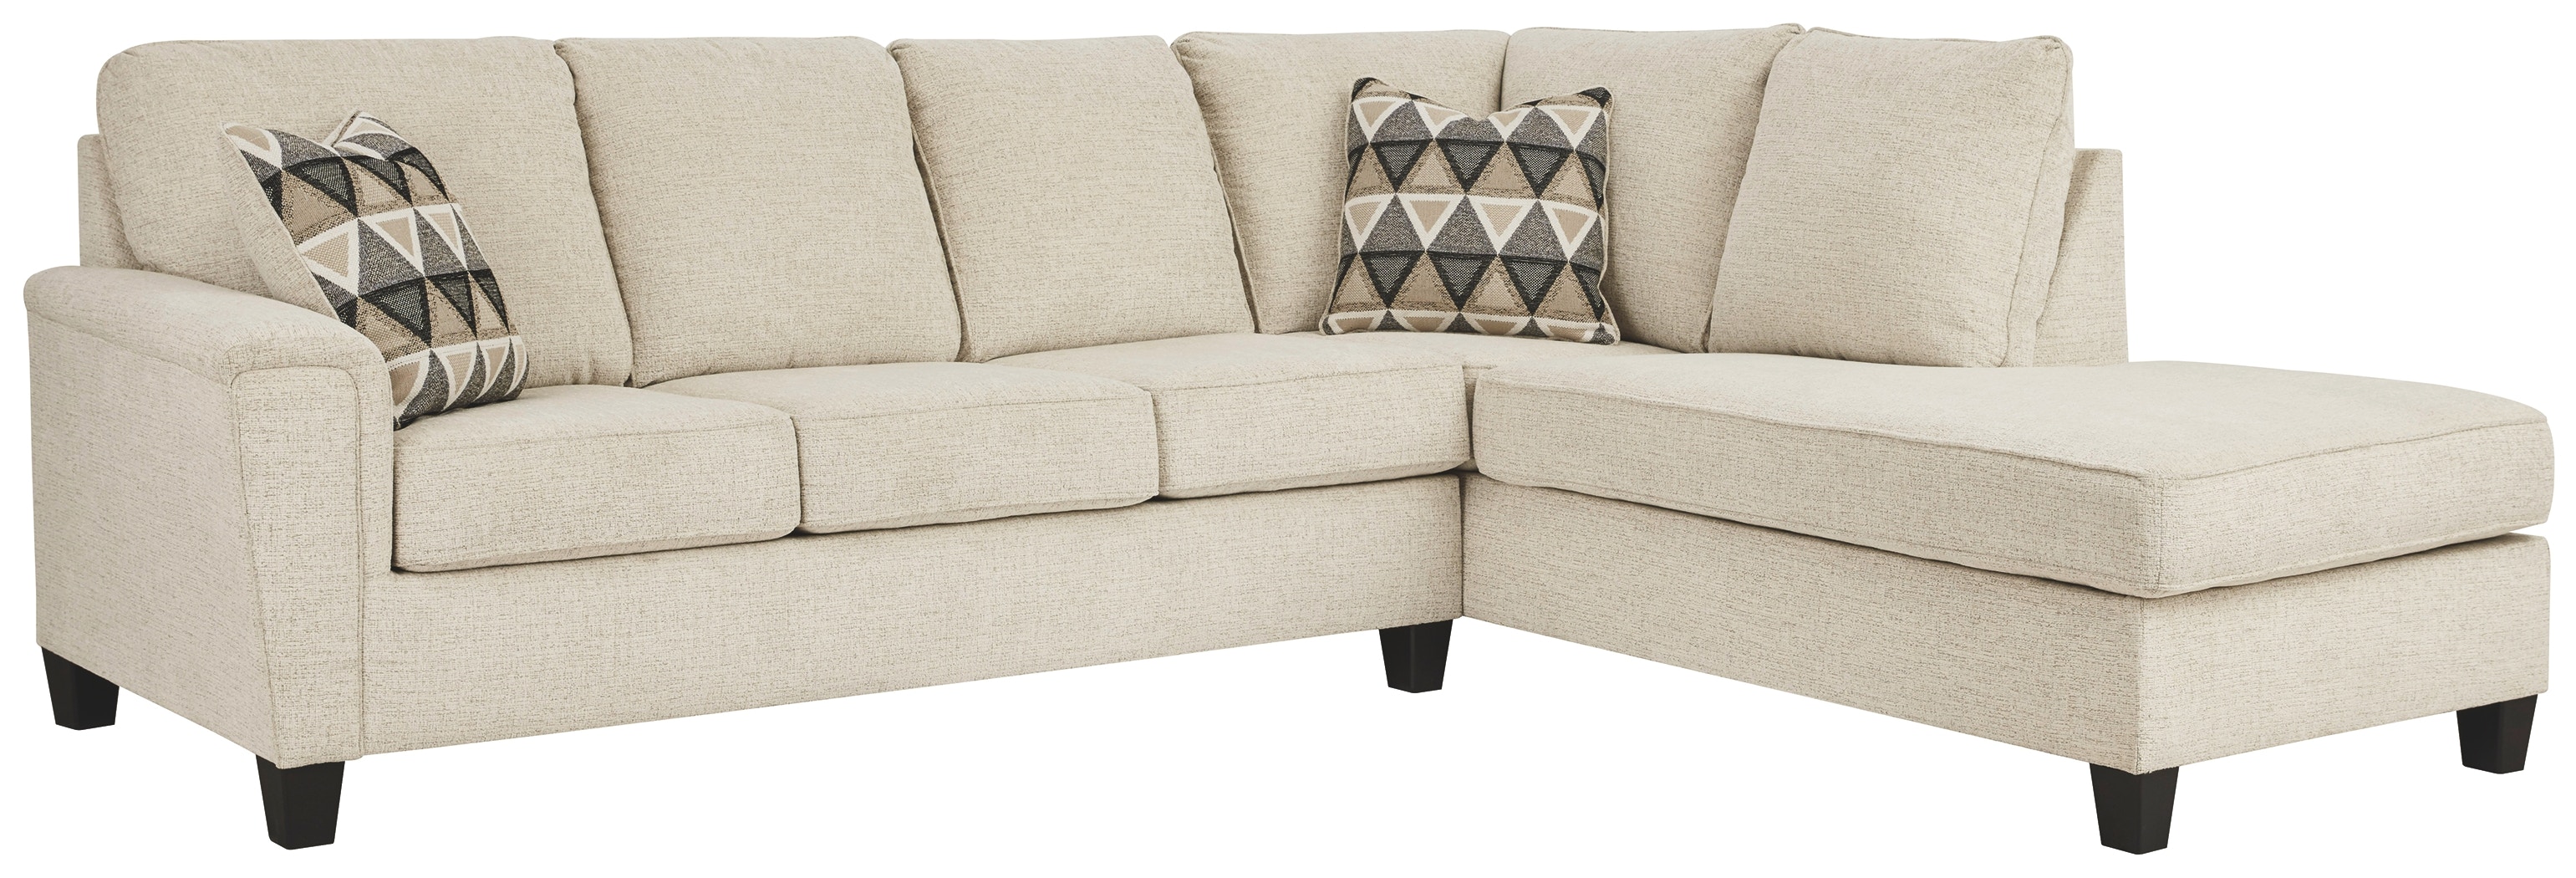 Abinger 2-Piece Sleeper Sectional with Chaise 83904S4